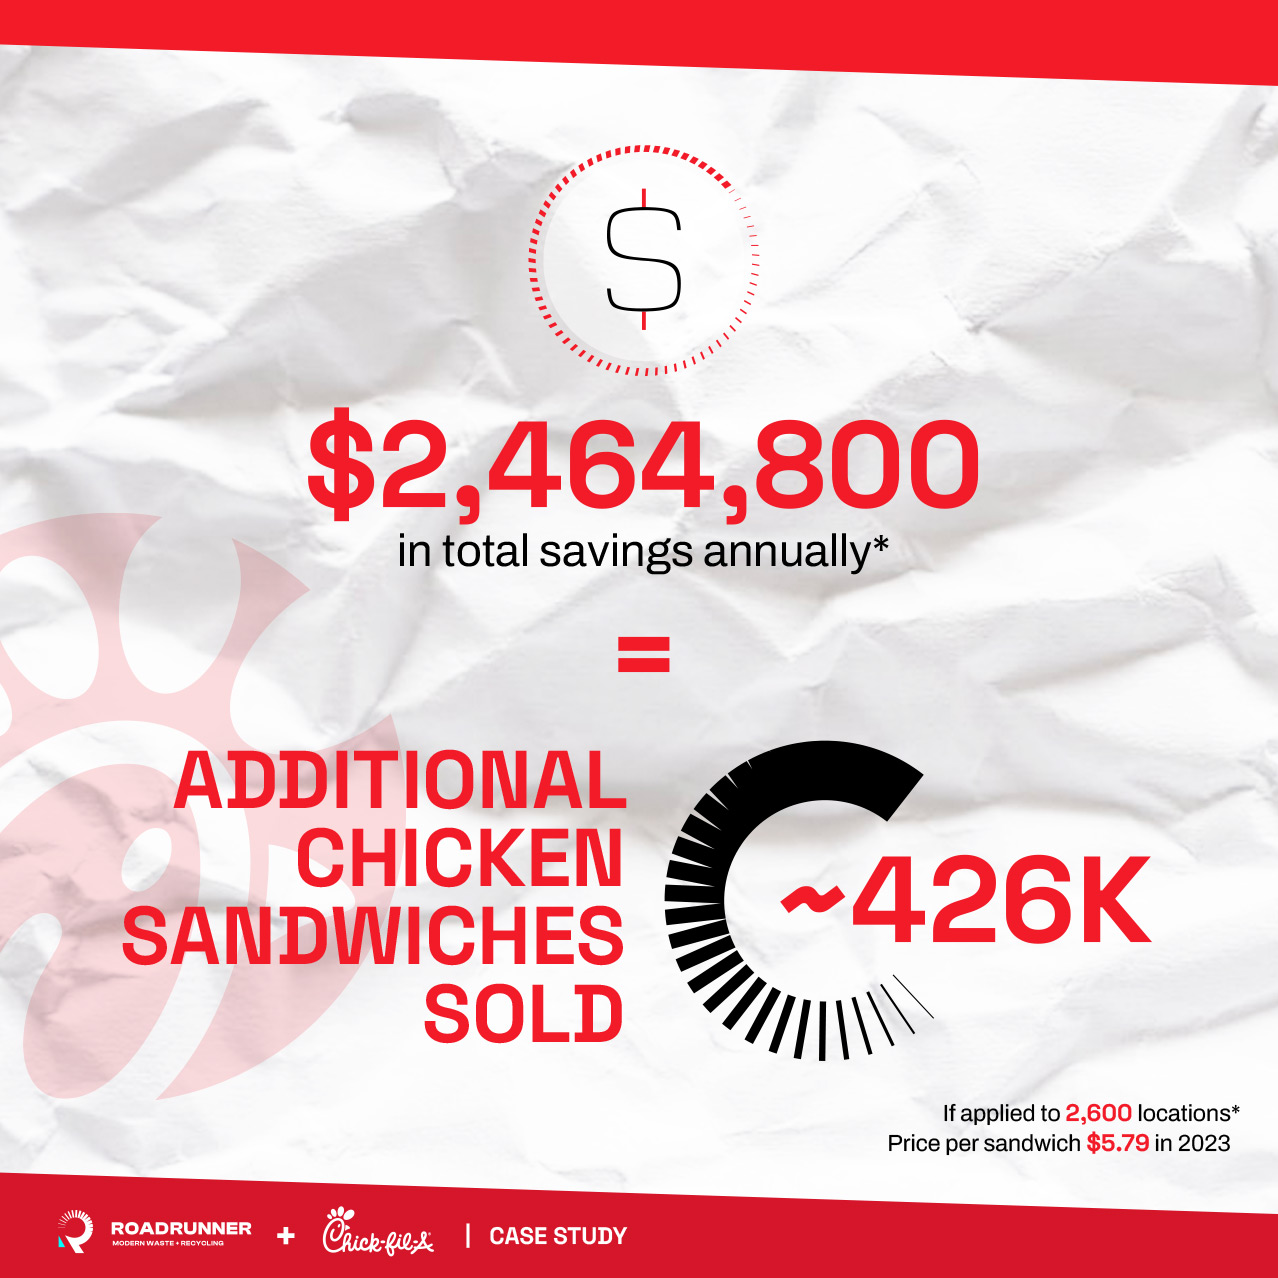 An infographic from a case study by RoadRunner and Chick-Fil-A of total savings annually per chicken sandwiches sold at Chick-fil-A locations